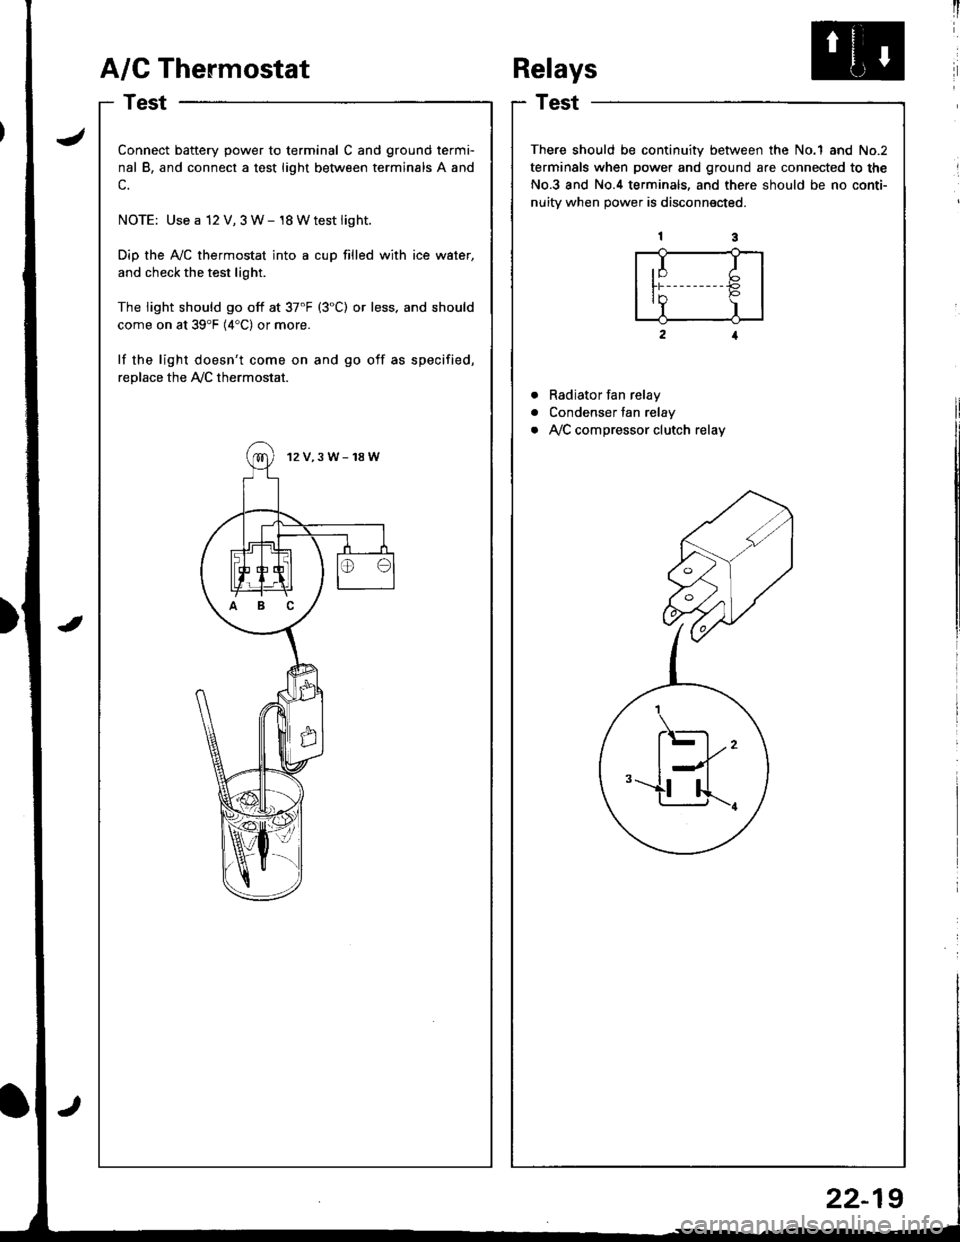 HONDA INTEGRA 1998 4.G Repair Manual A/G Thermostat
I
I
a
a
a
t)
Connect battery power to terminal C and ground termi-
nal B, and connect a test light between terminals A and
c.
NOTE: Use a 12 V, 3 W- 18 Wtest light.
Dip the AyC thermos